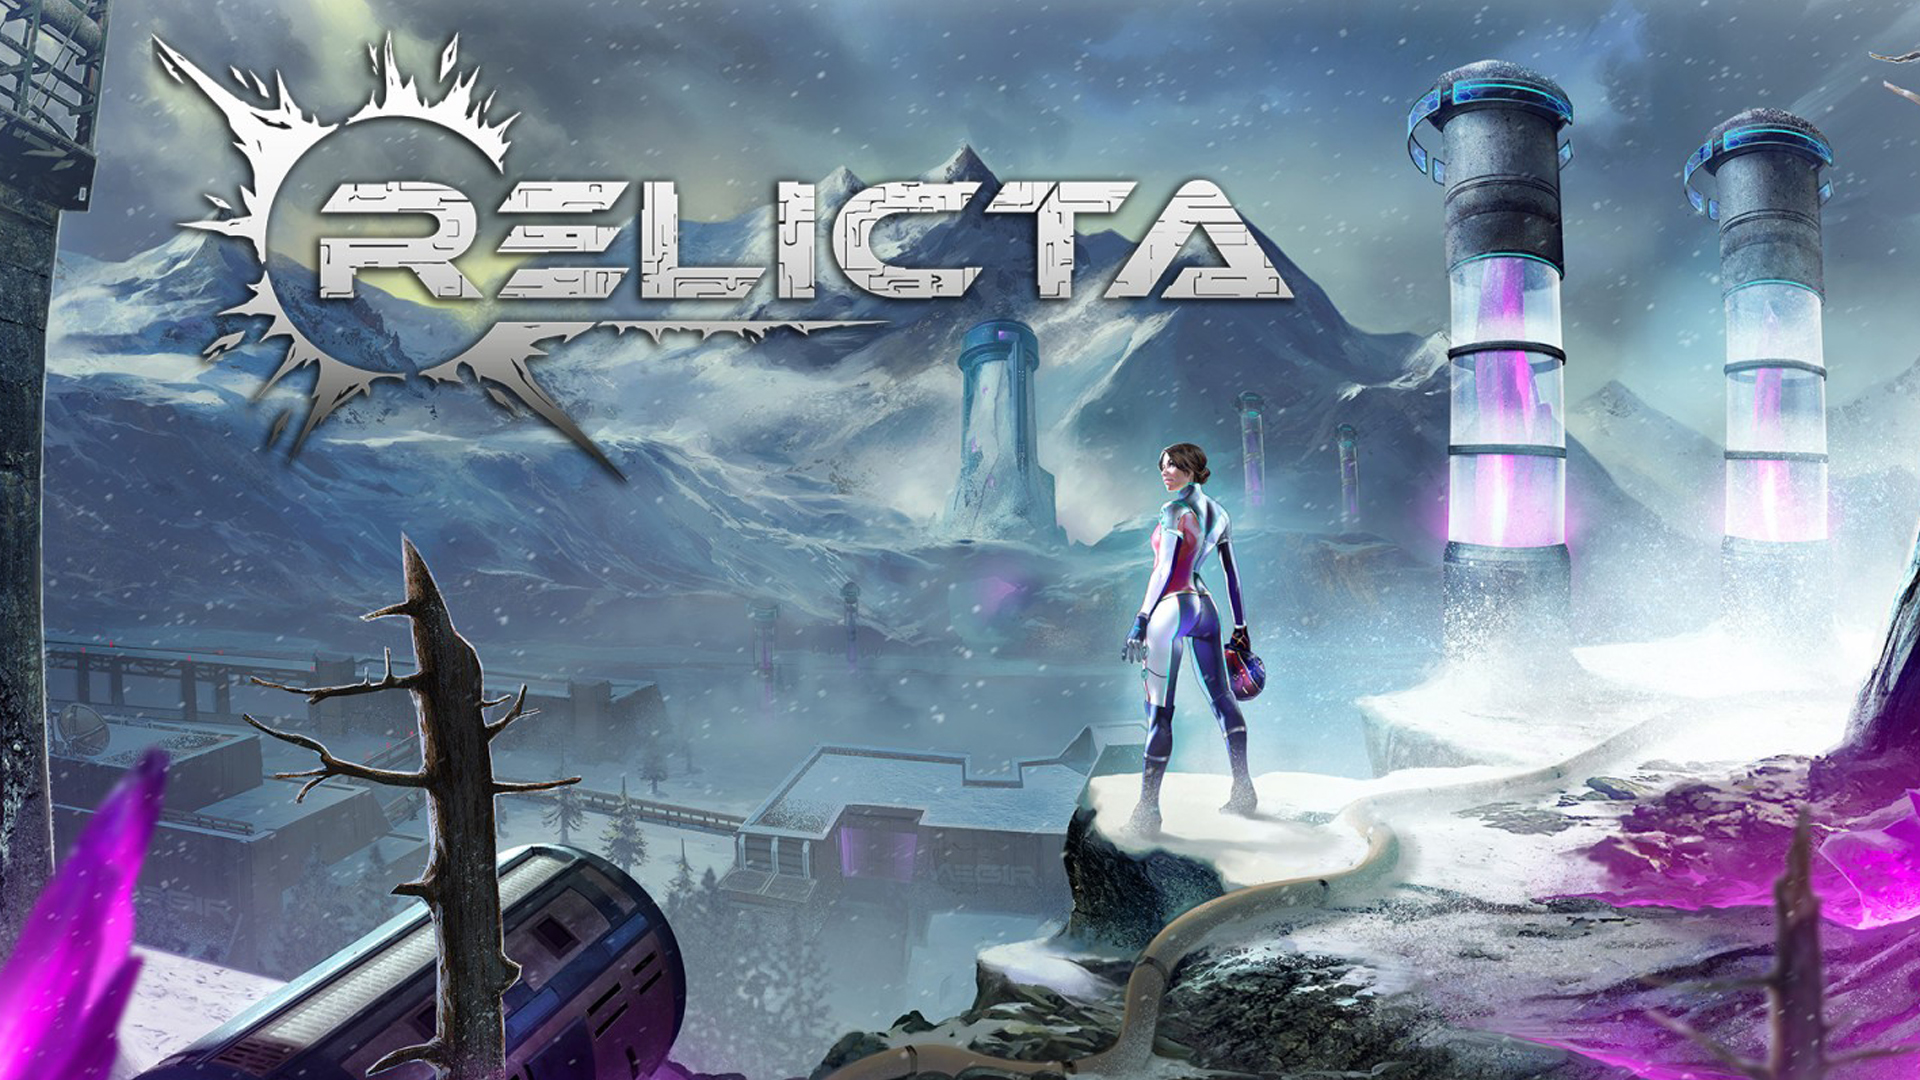 Relicta: Free Game on Epic Games Store, Dates & Info - Breakflip

